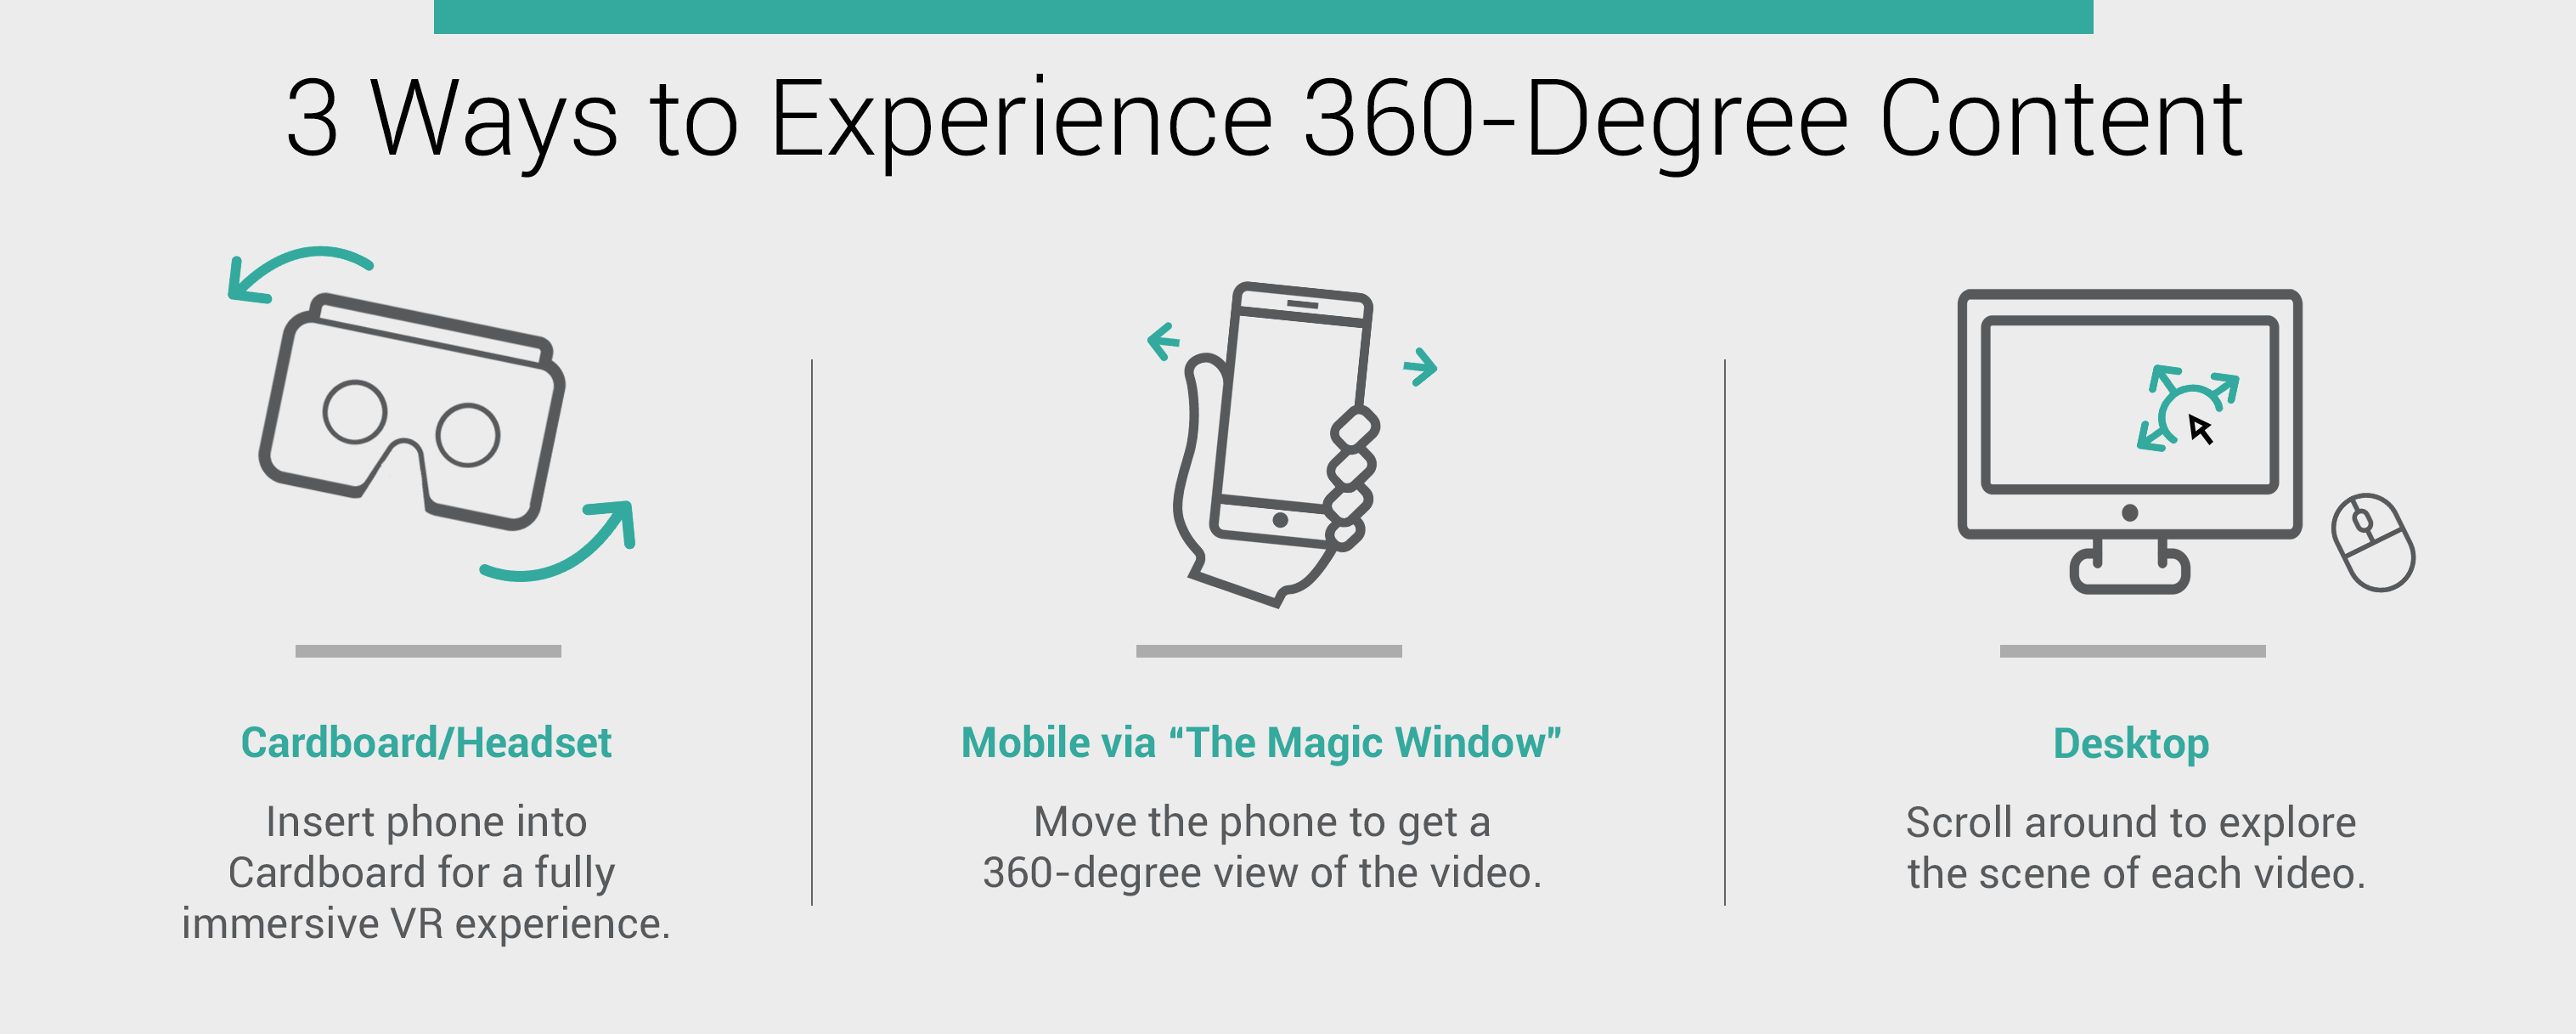 image with title "3 ways to experience 360-degree content"